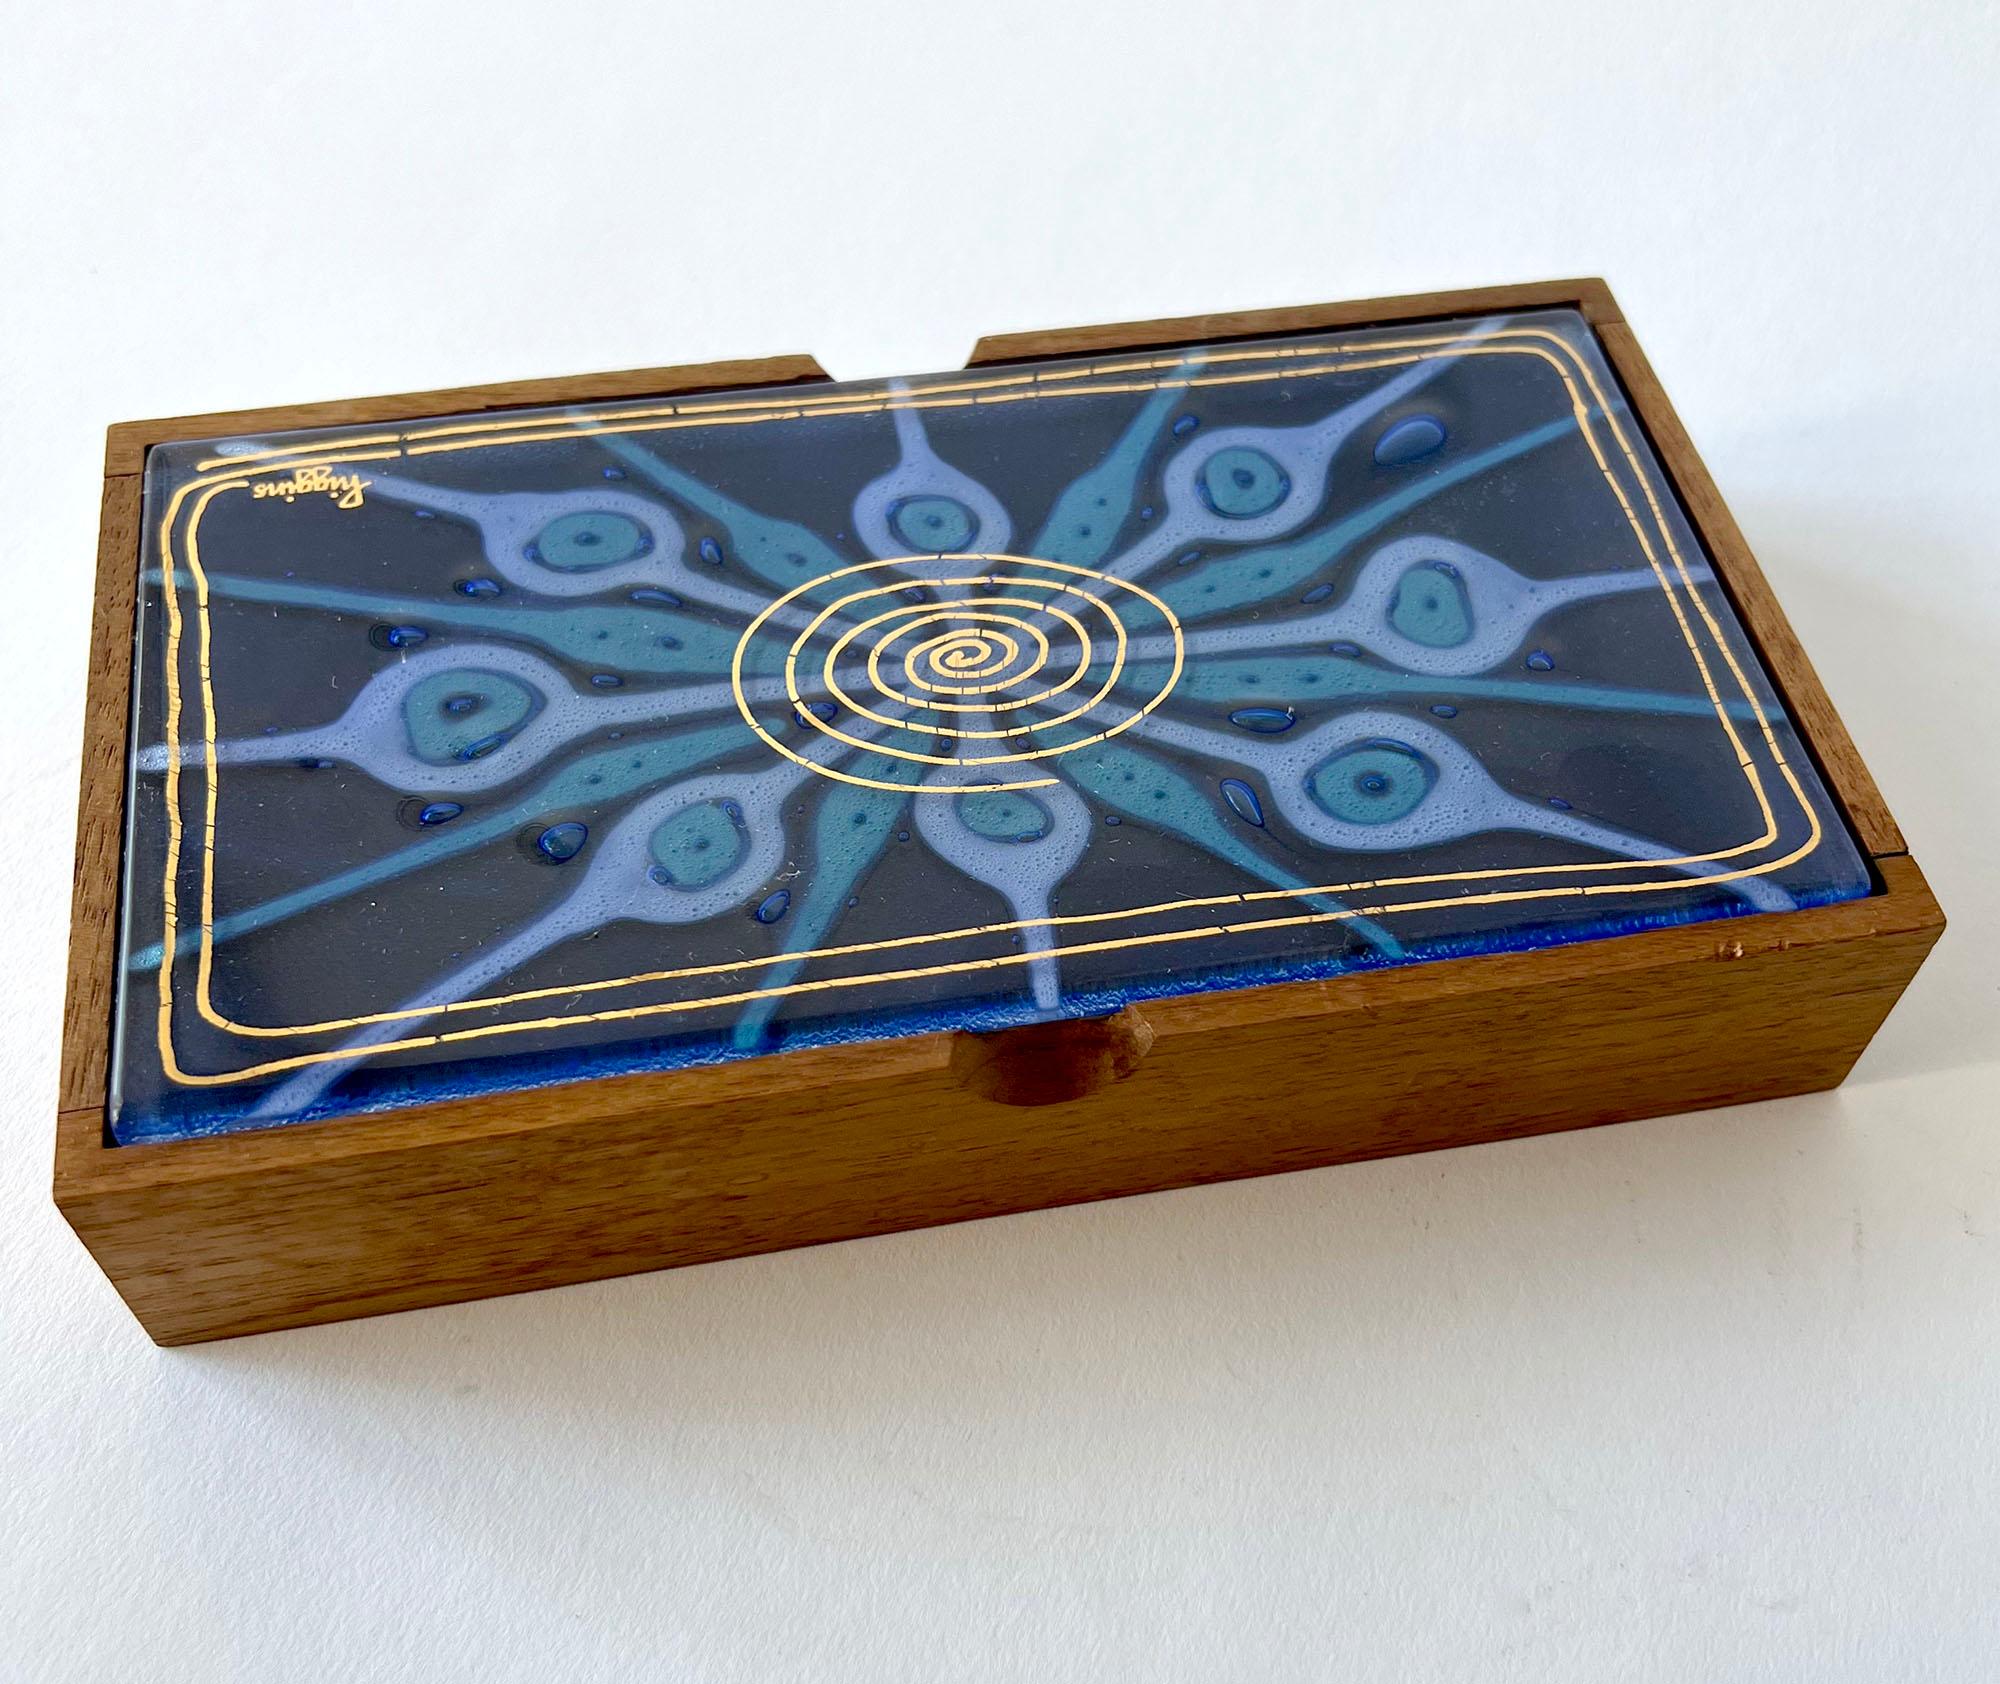 Walnut wood box with glass lid created by Frances and Michael HIggins of Riverside, Illinois. Box measures 1.5